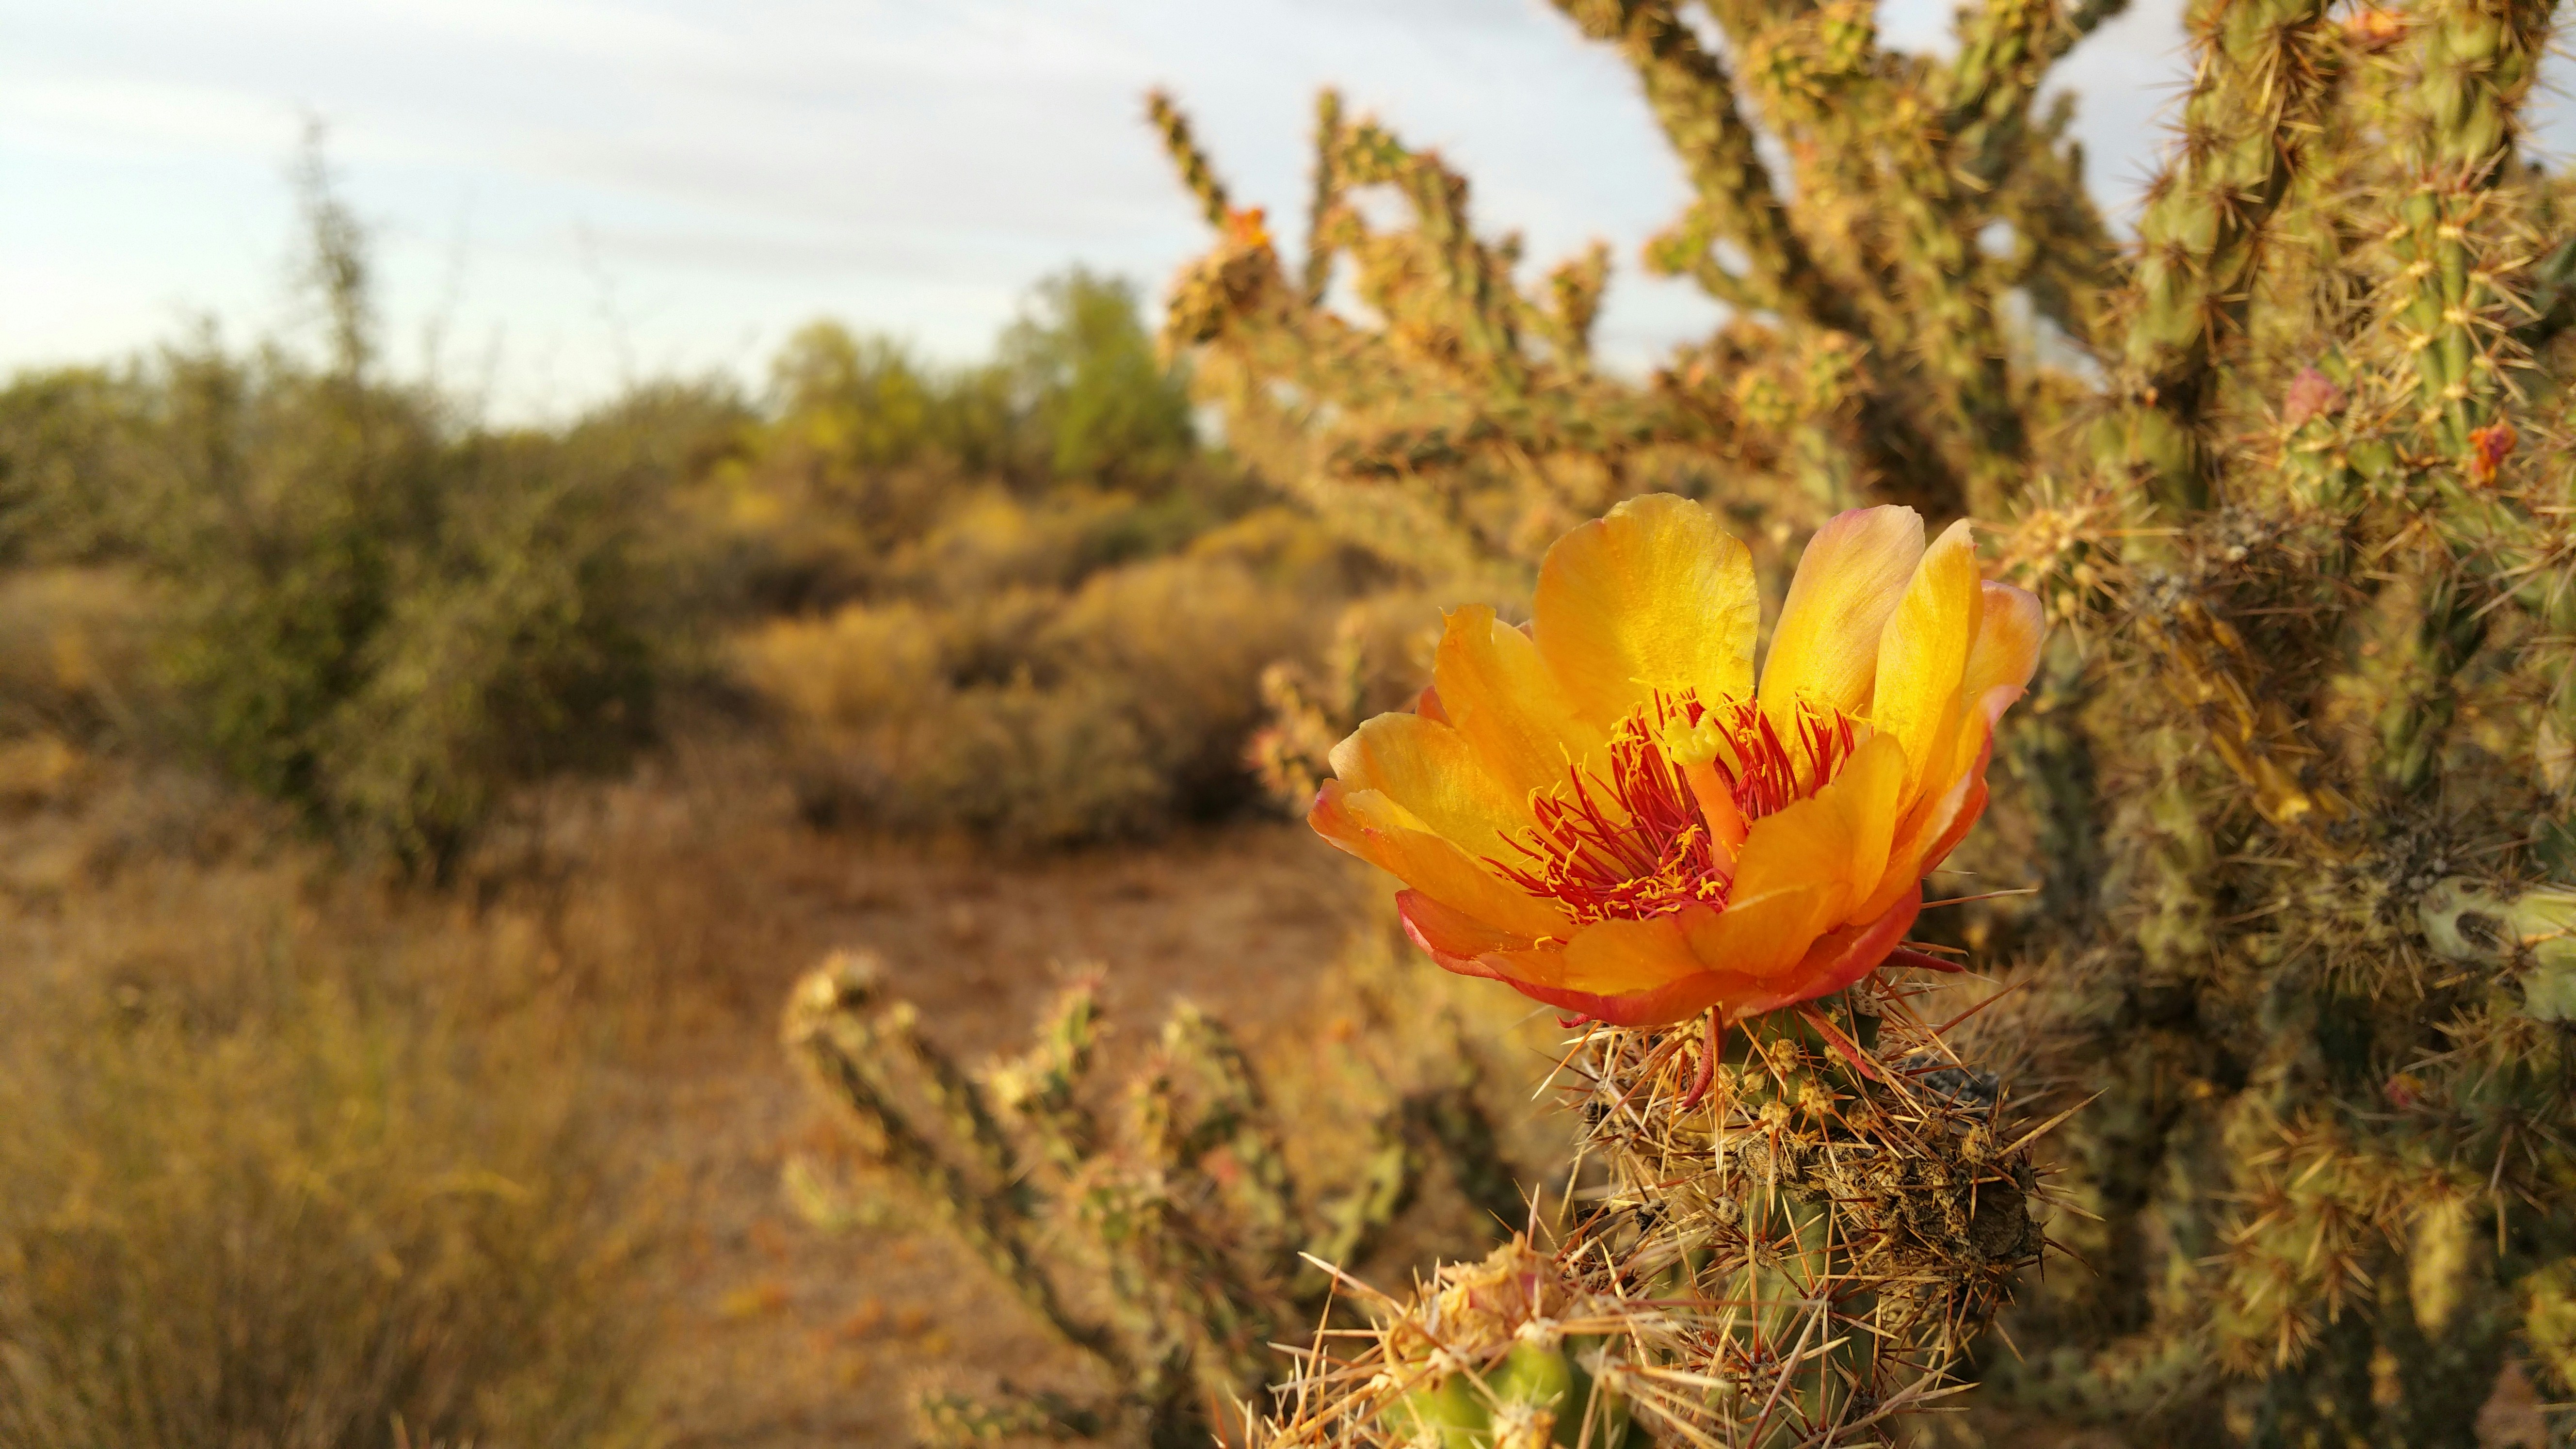 Photo of a cactus in the desert, blooming with a yellow and red flower.